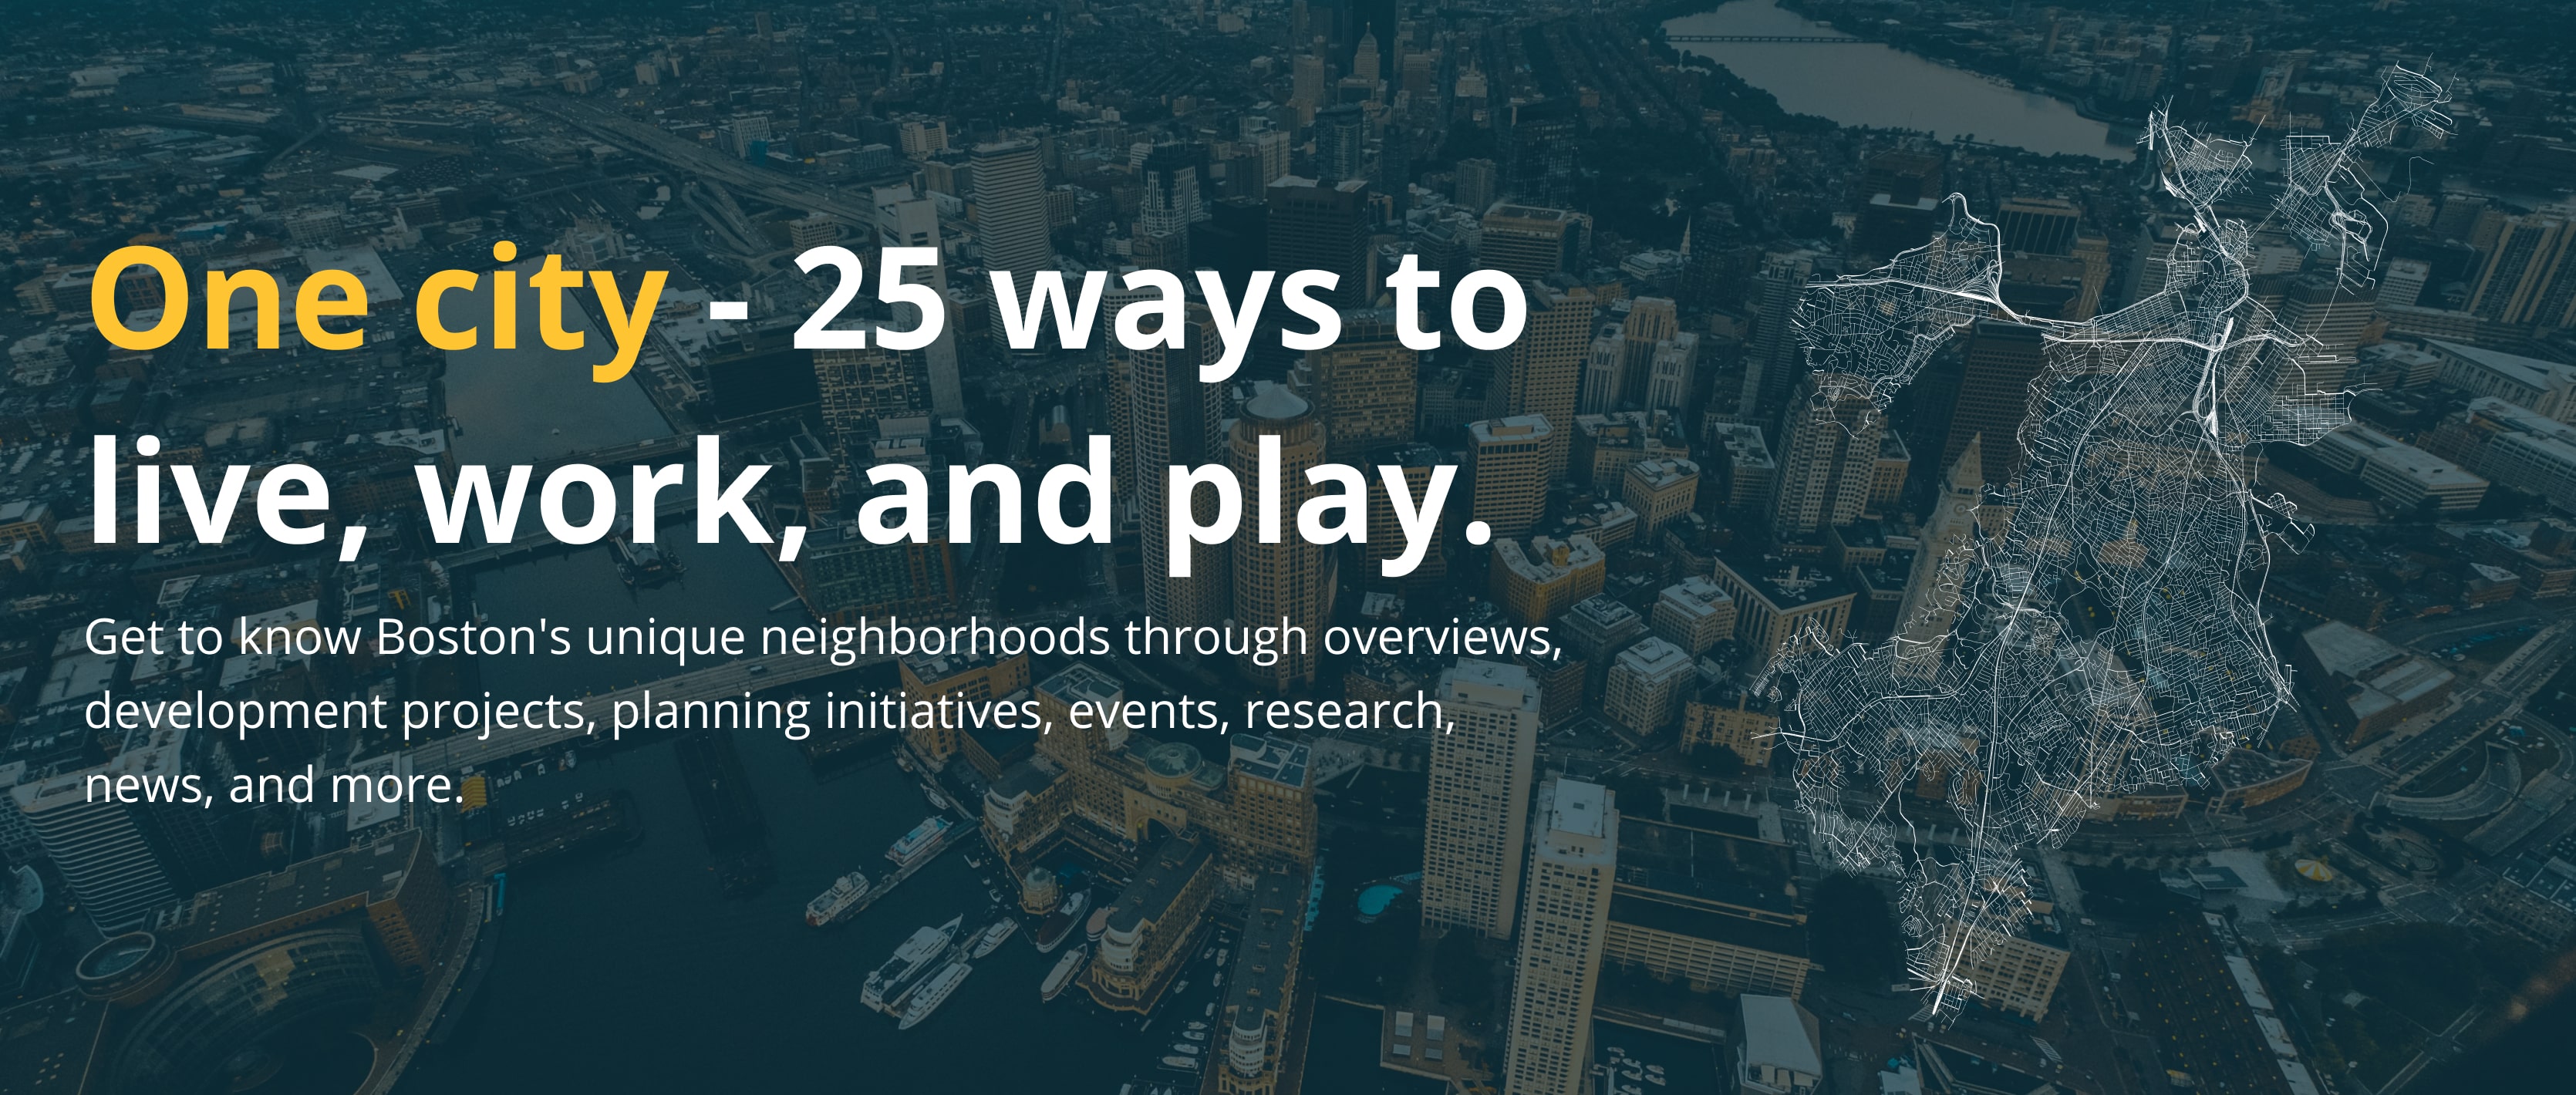 <h2>
	One city - 25 ways to live, work, and play.</h2>
Get to know Boston's unique neighborhoods through overviews, development projects, planning initiatives, events, research, news, and more.